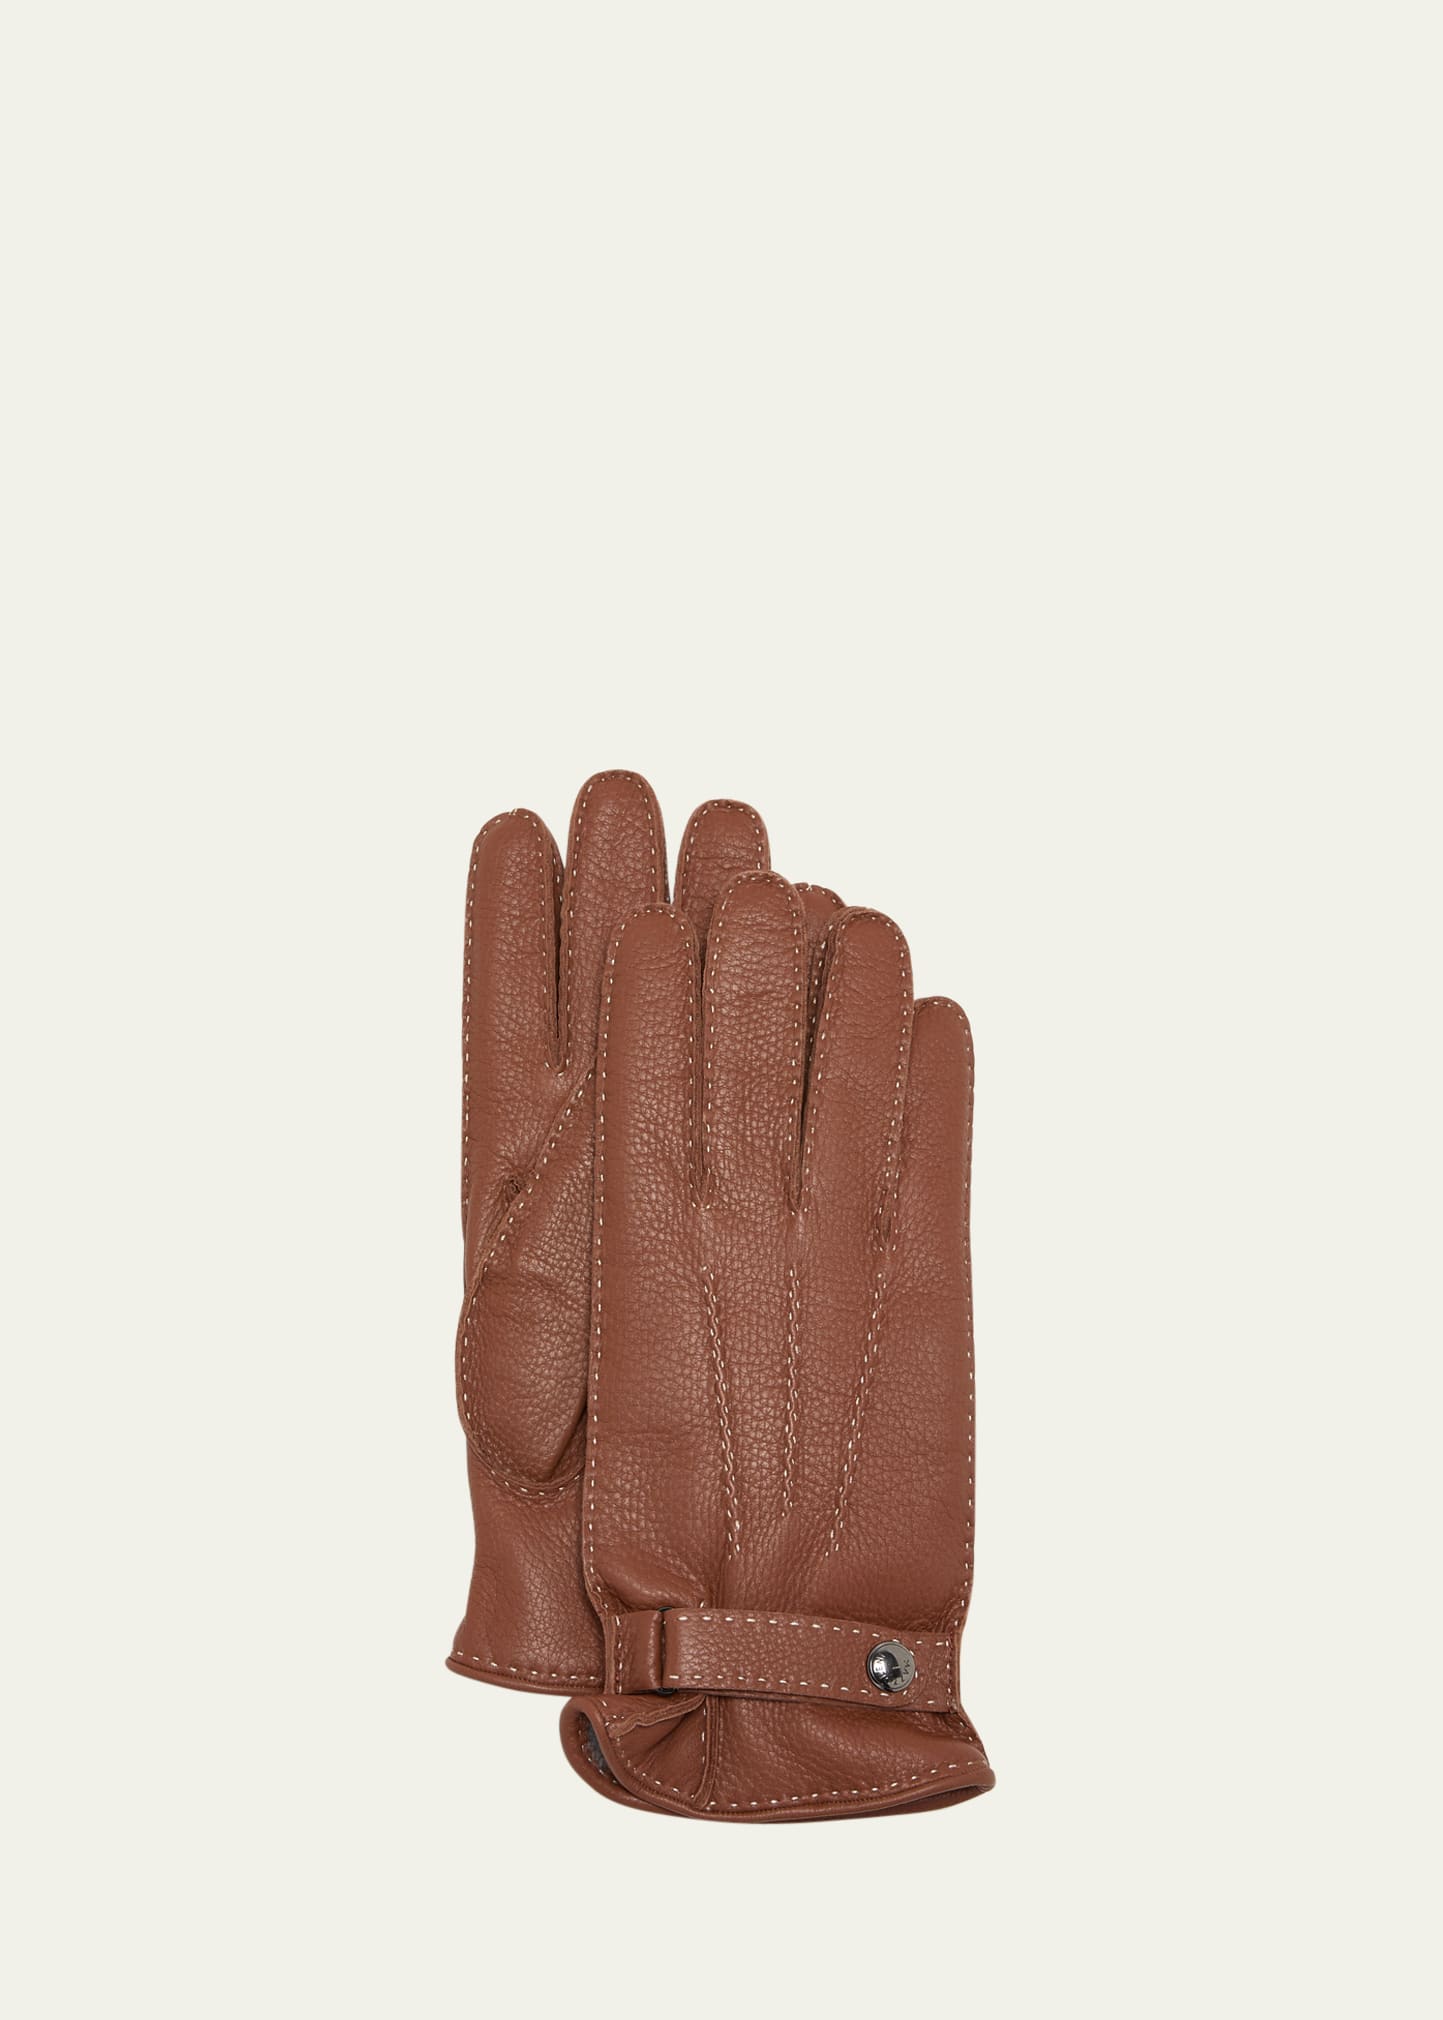 Men's Deerskin Leather Gloves with Cashmere-Silk Lining